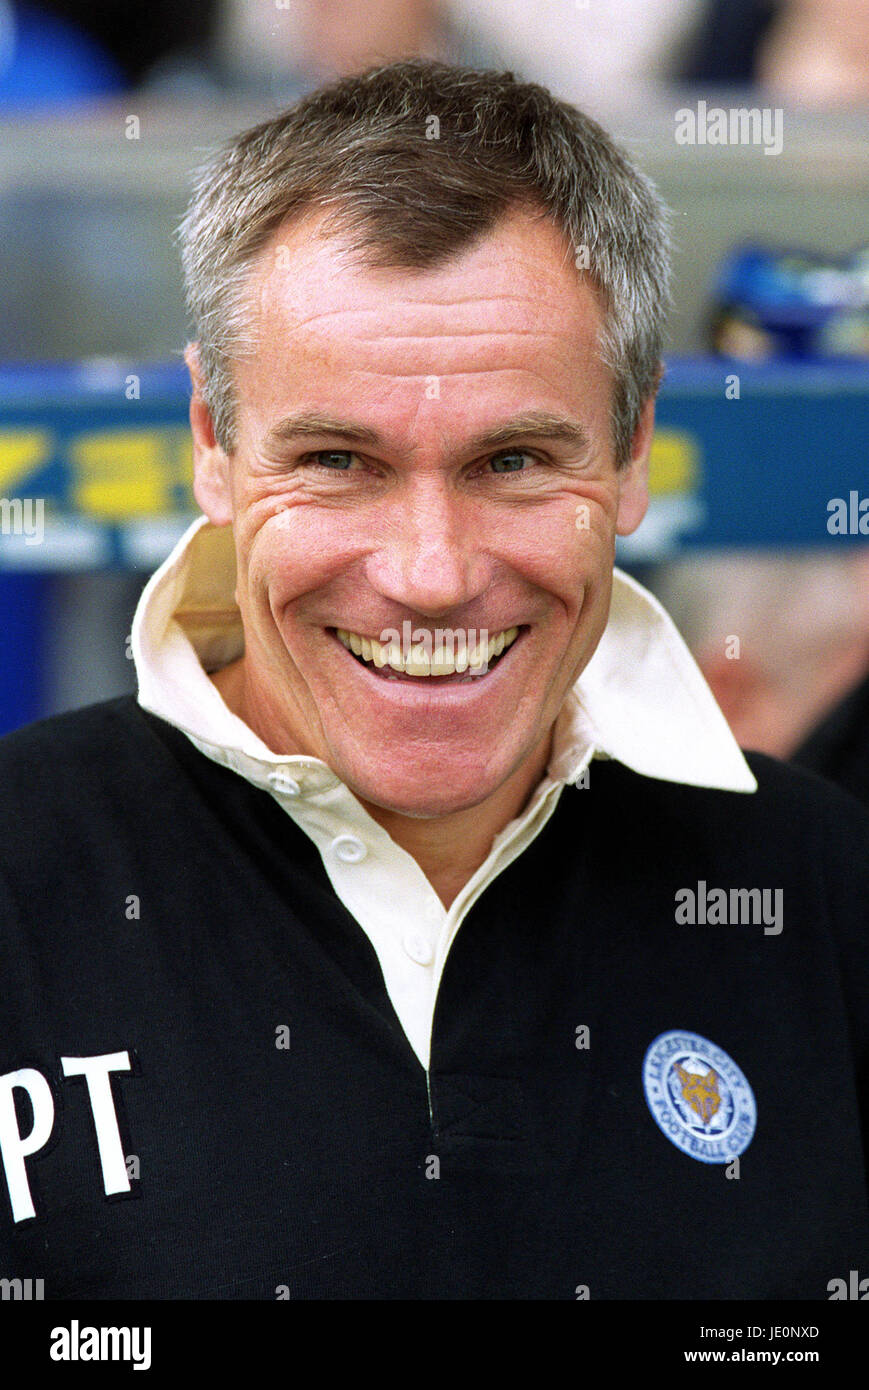 peter-taylor-leicester-city-fc-manager-l